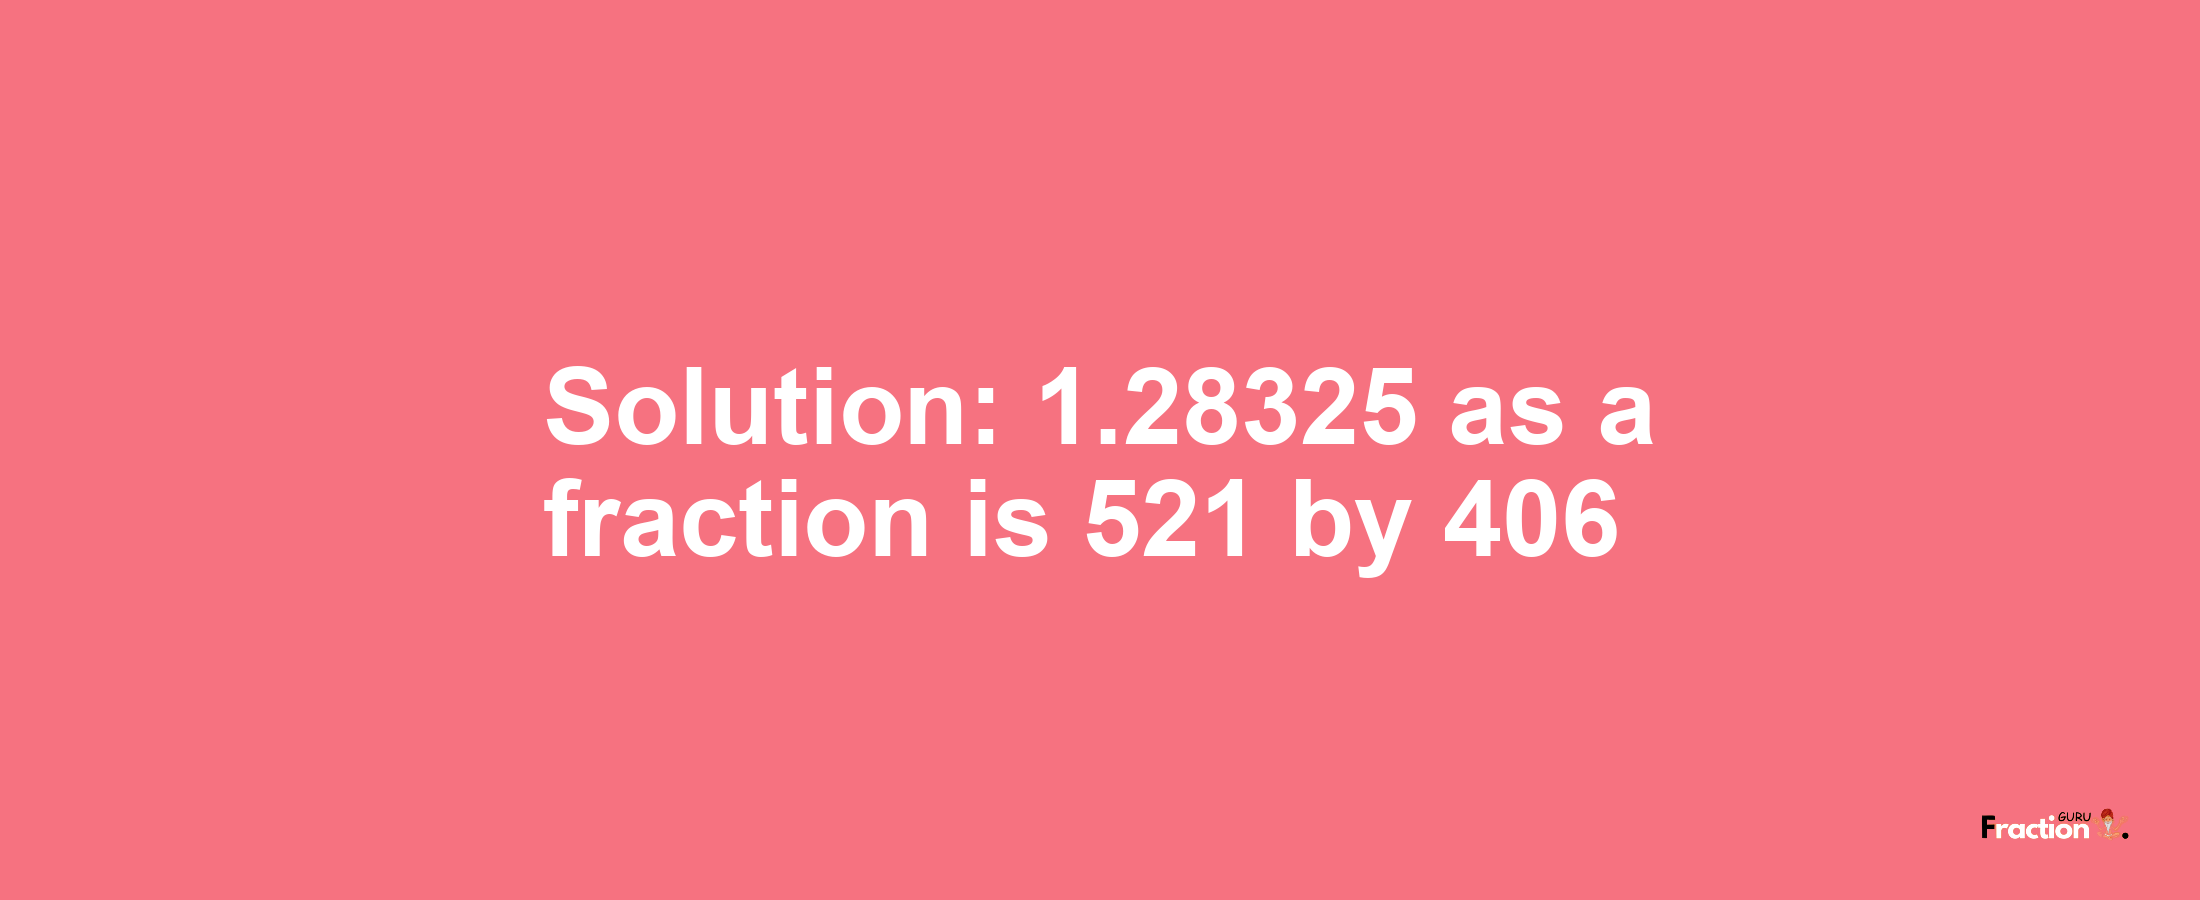 Solution:1.28325 as a fraction is 521/406